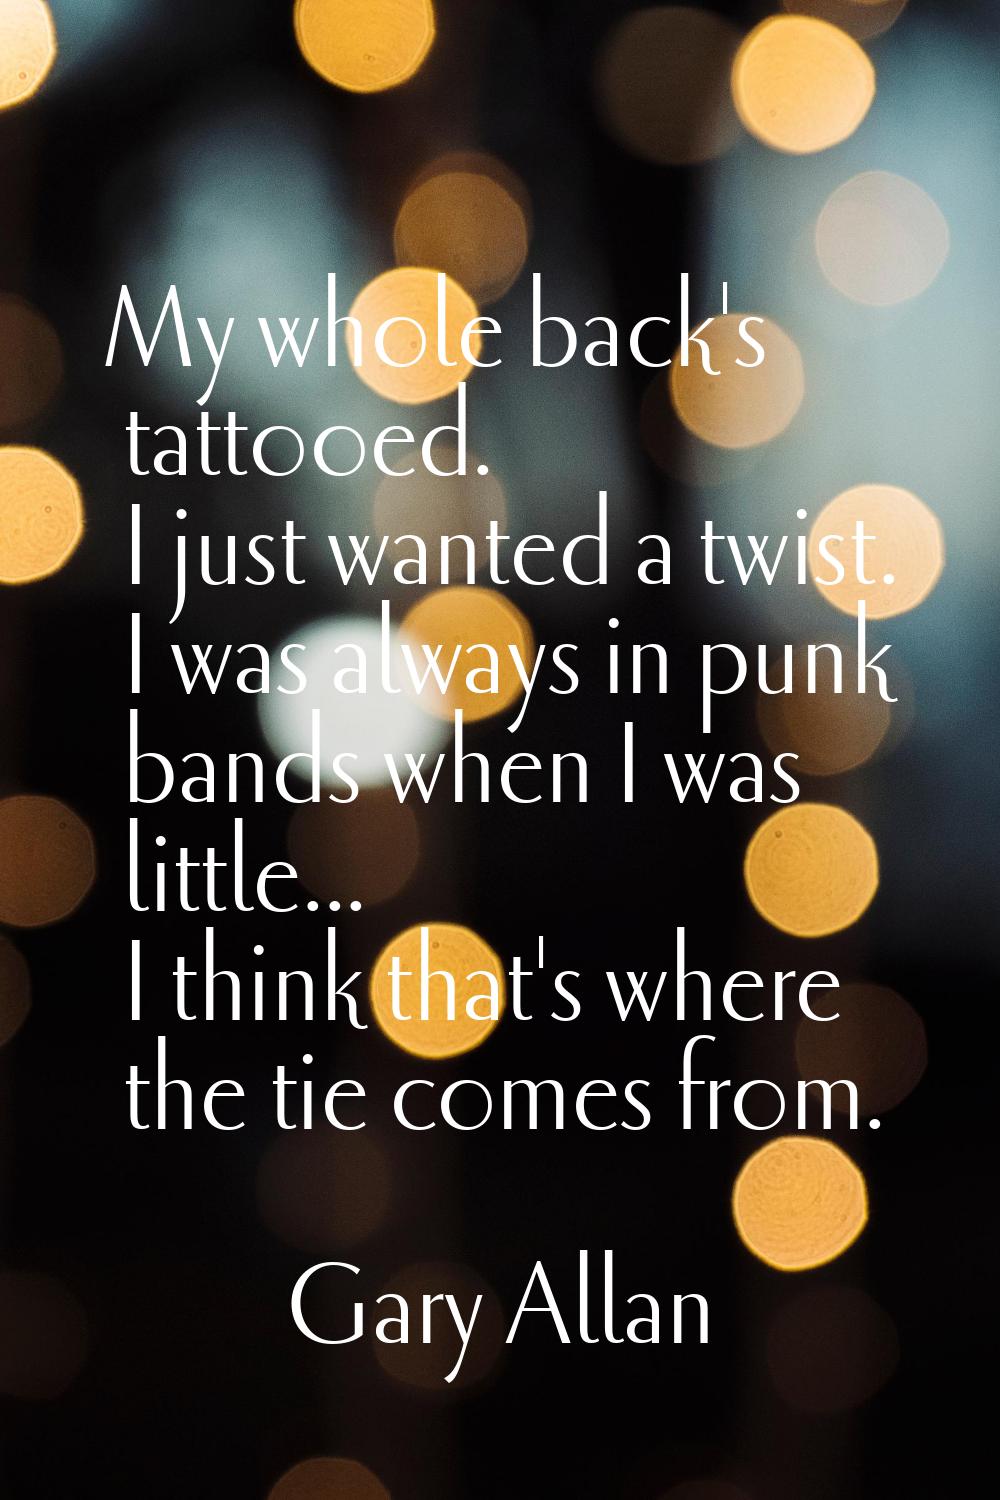 My whole back's tattooed. I just wanted a twist. I was always in punk bands when I was little... I 